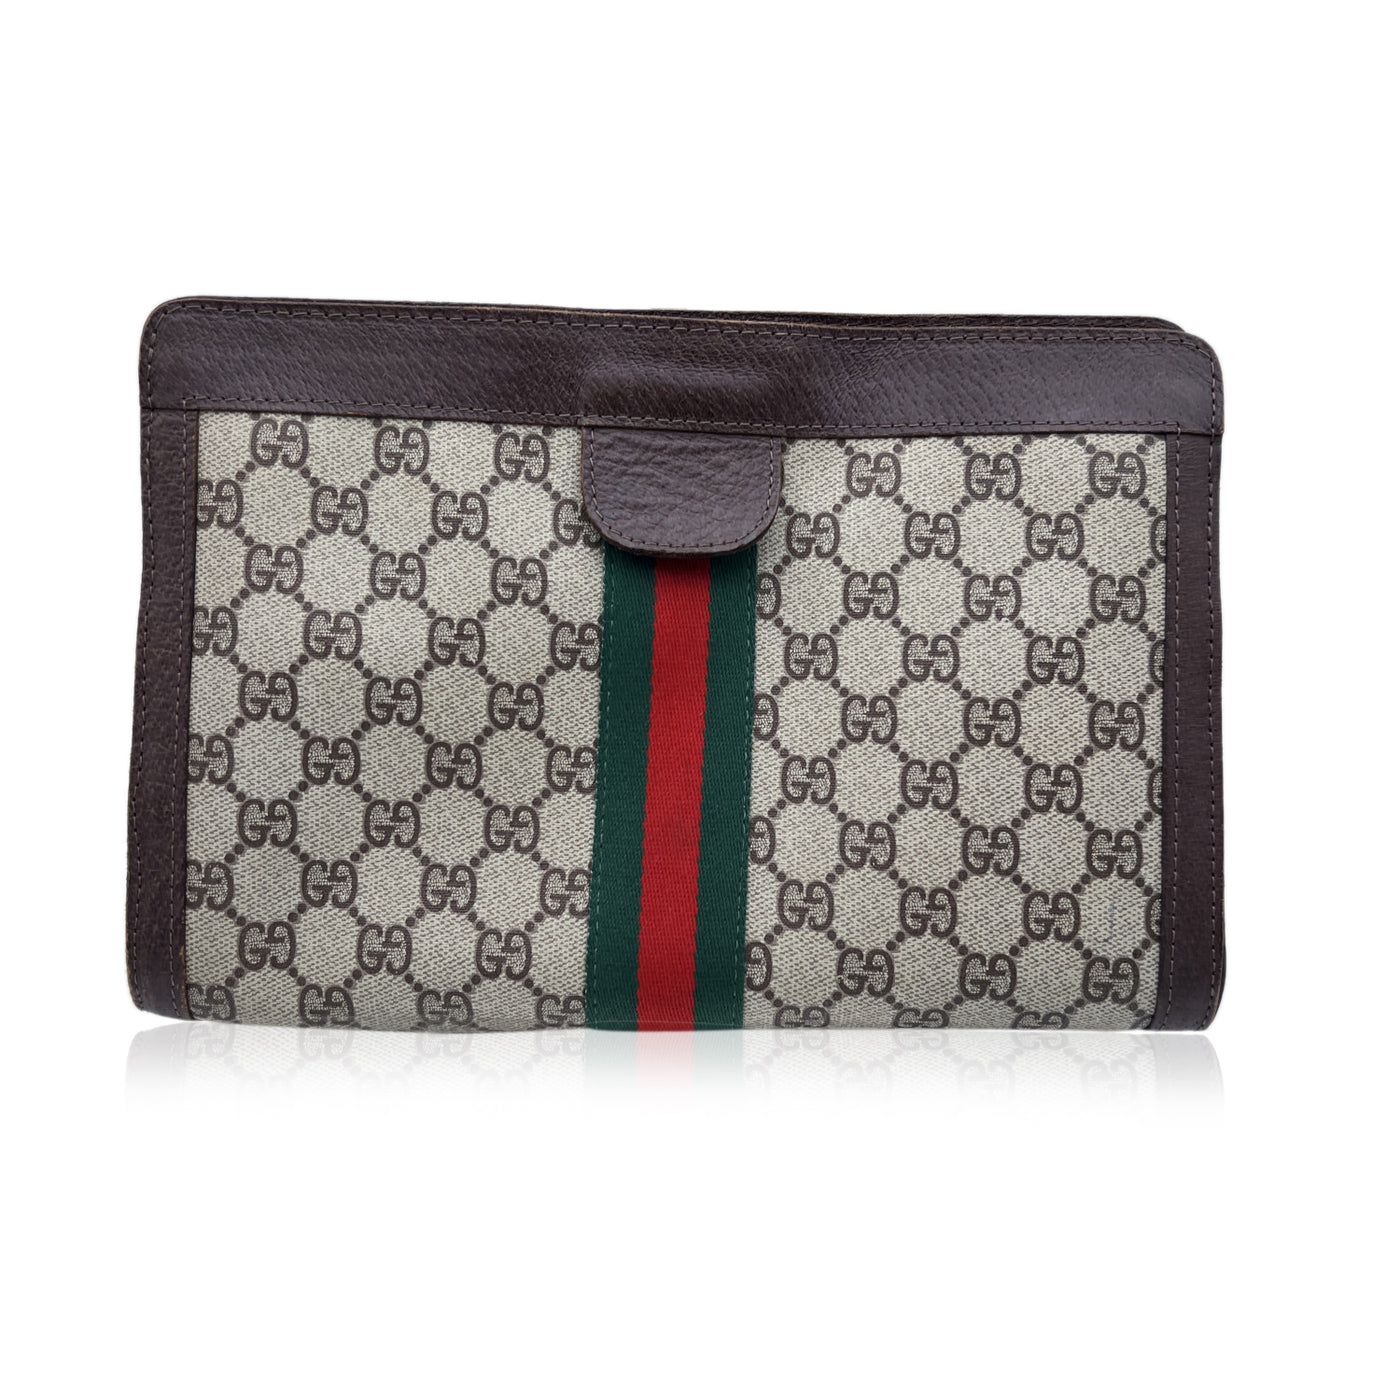 Gucci Vintage Beige Monogram Canvas Cosmetic Case with Stripes